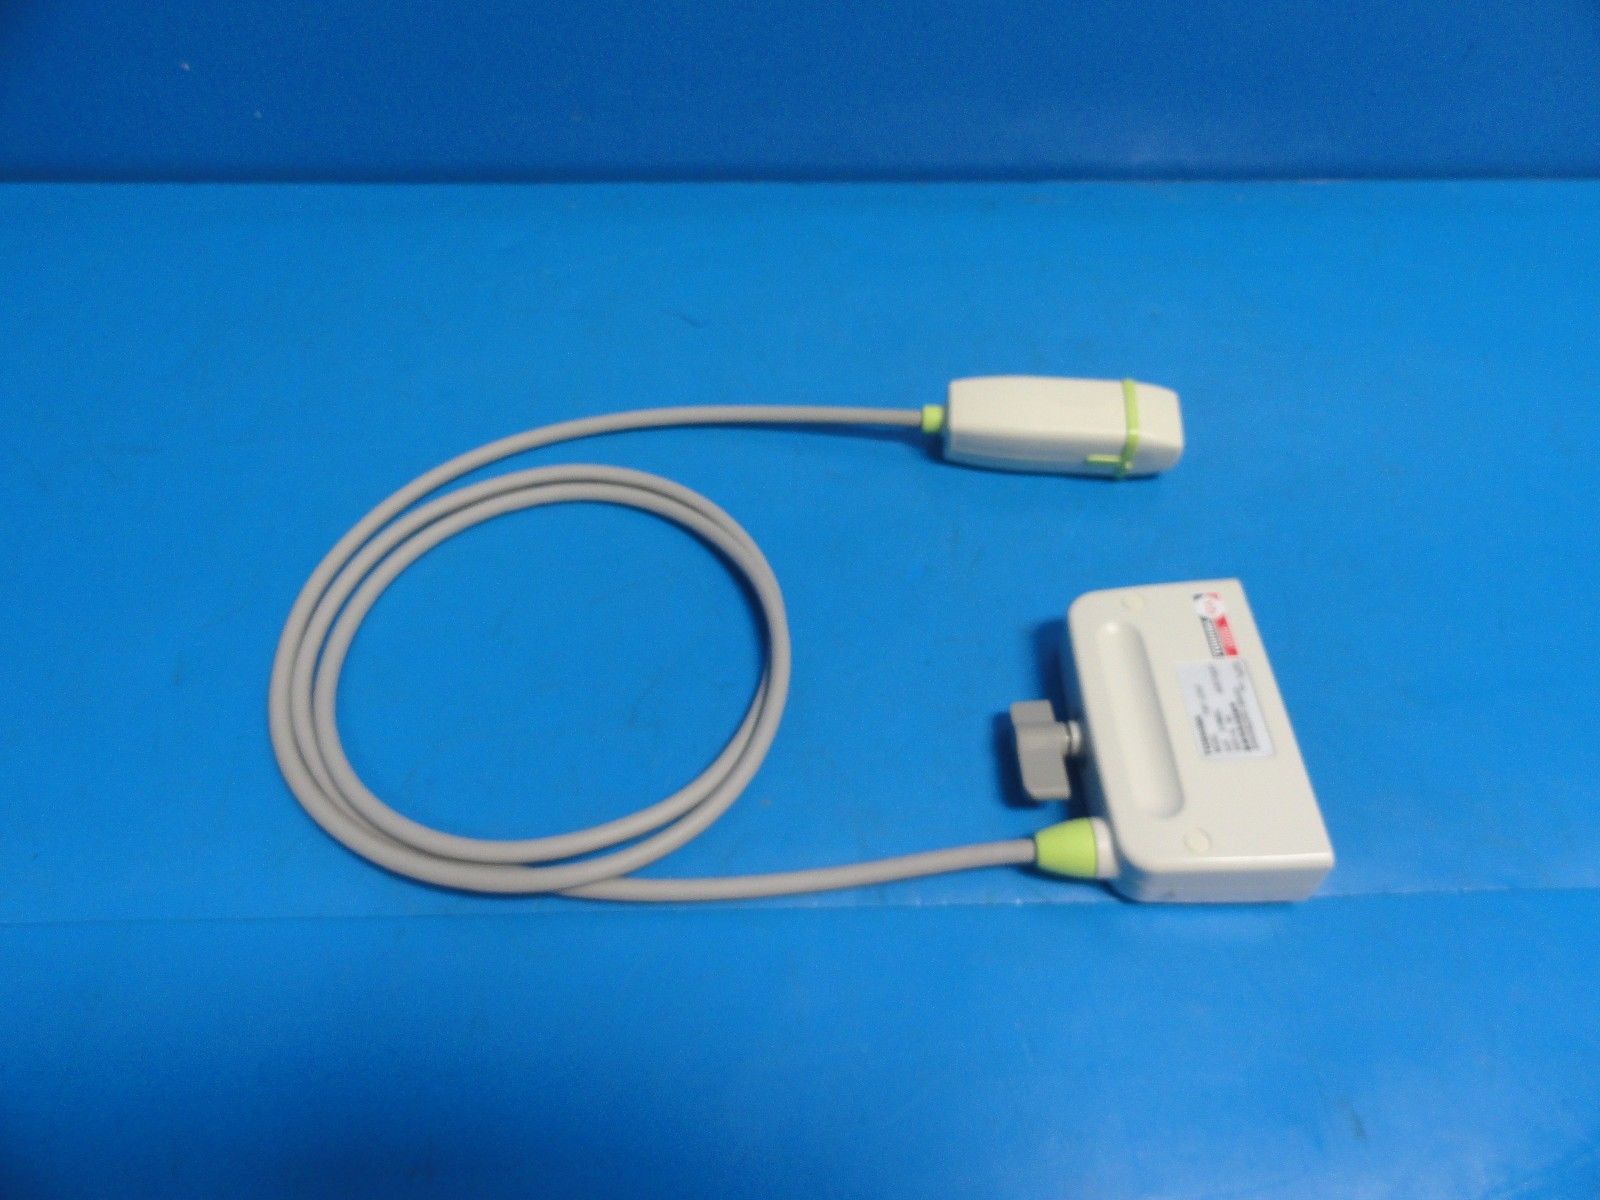 TOSHIBA PSF-37HT 3.75MHz Phased Array Probe for Toshiba SSH-140A & 340A (8943 ) DIAGNOSTIC ULTRASOUND MACHINES FOR SALE